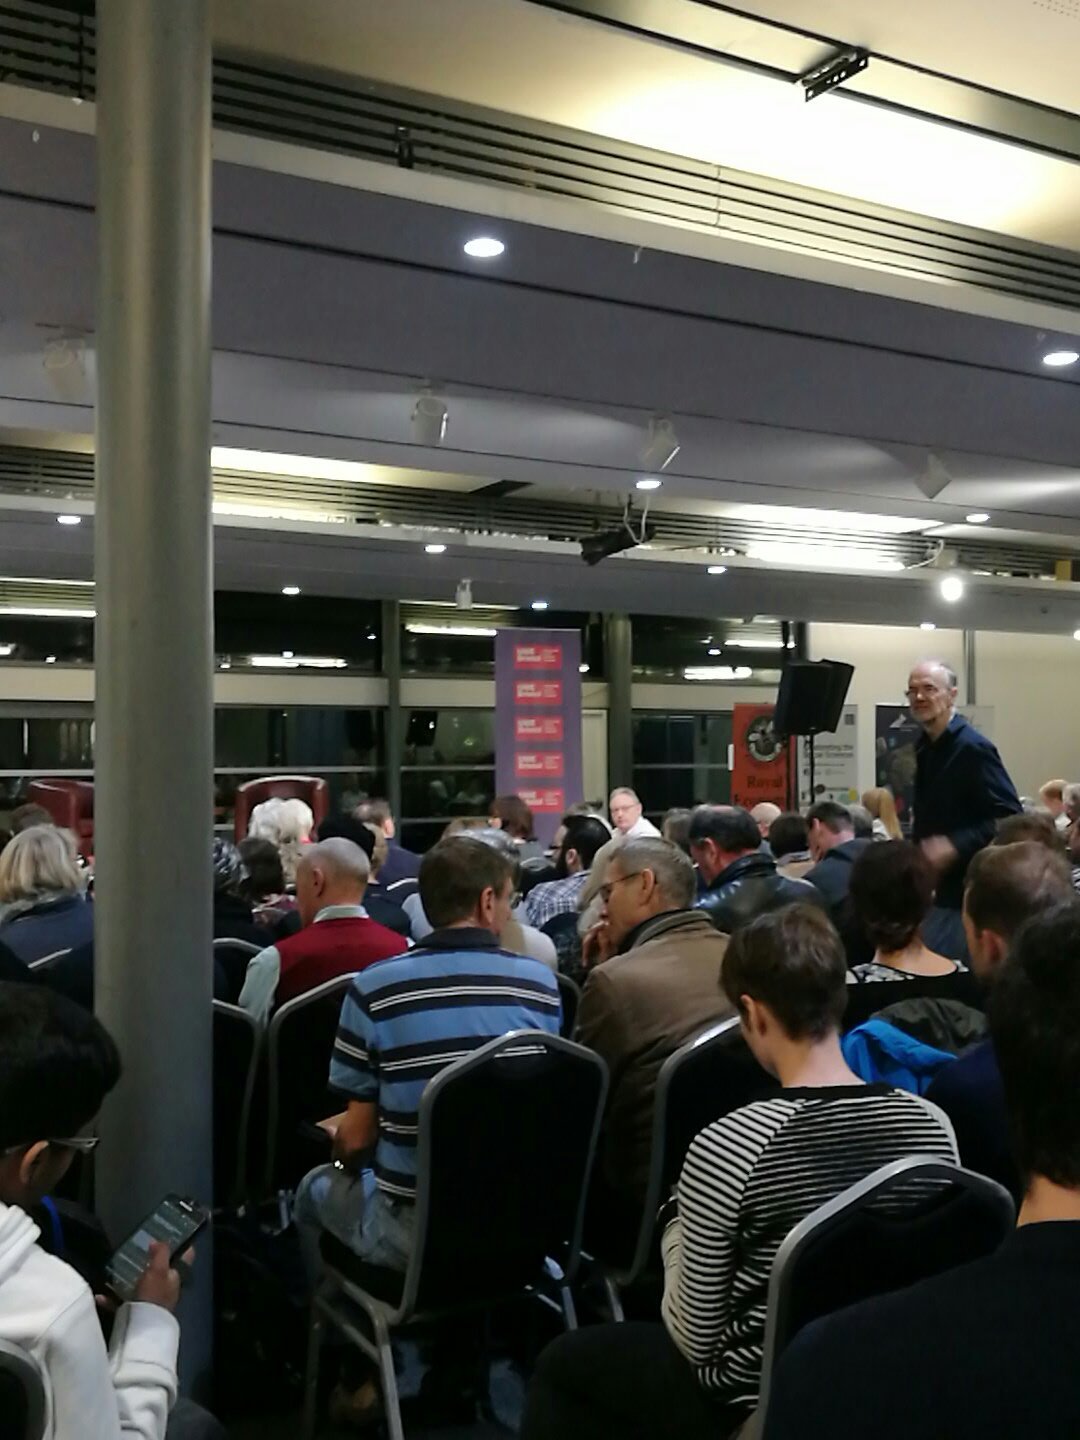 Busy @AtBristol this evening discussing the economics of messiness with @TimHarford #economicsfest #shouldwebemorelikedenmark #trumpjokes https://t.co/9gOamTFjI5